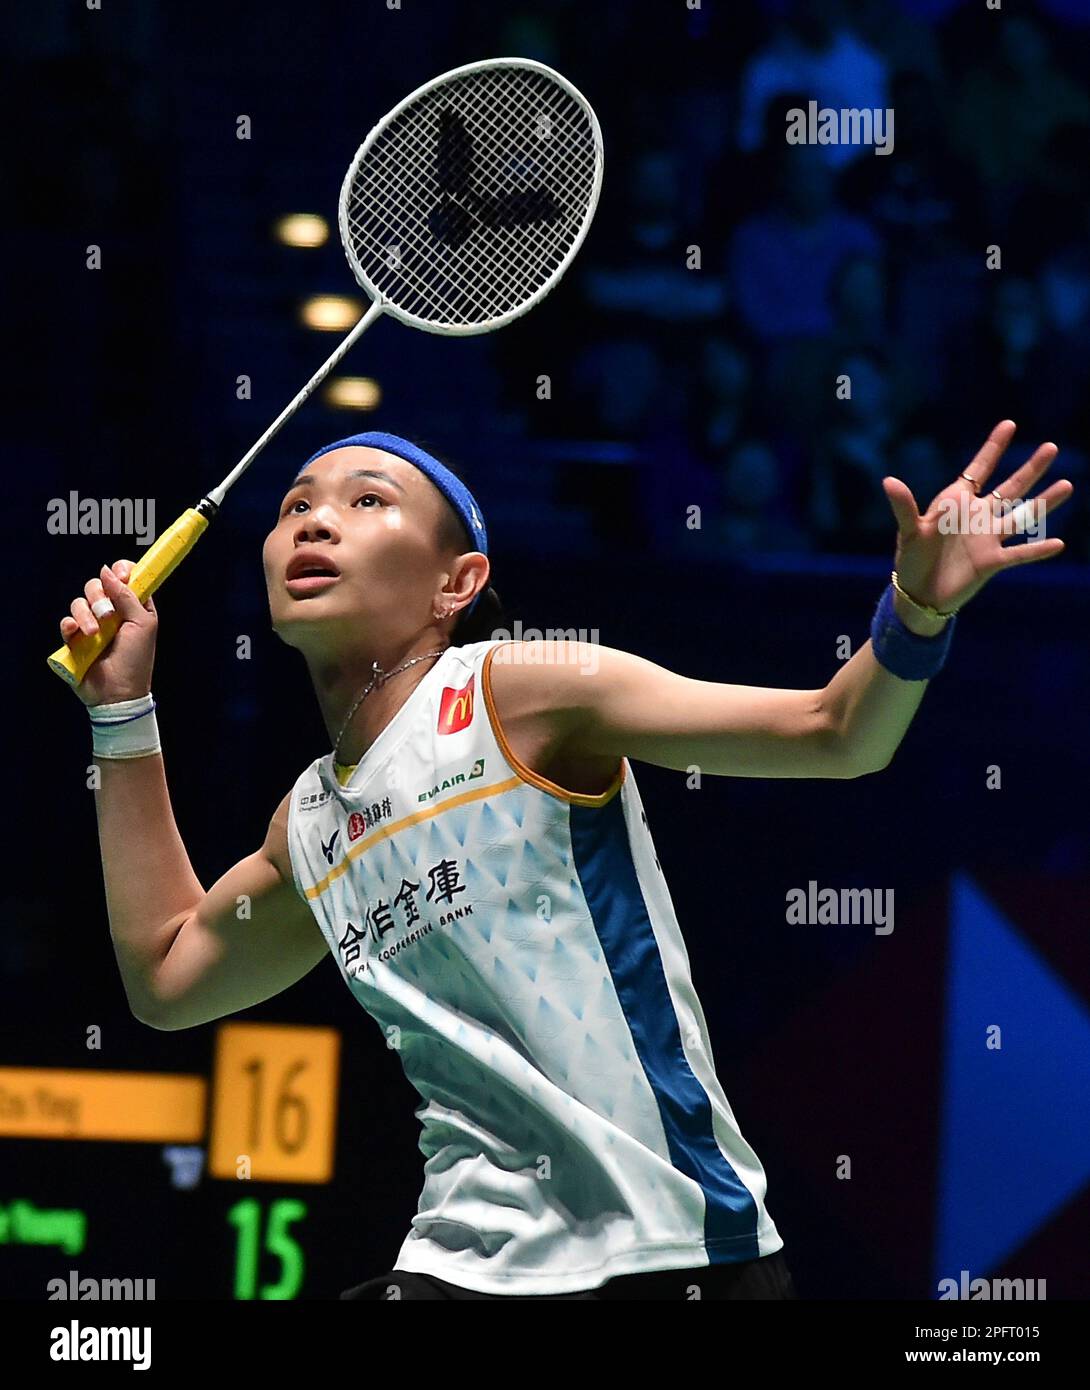 Chinese Taipei's Tai Tzu Ying returns a shot during the women's semi final  match against Korea's An Se Young in the All England Open Badminton  Championships at the Utilita Arena in Birmingham,